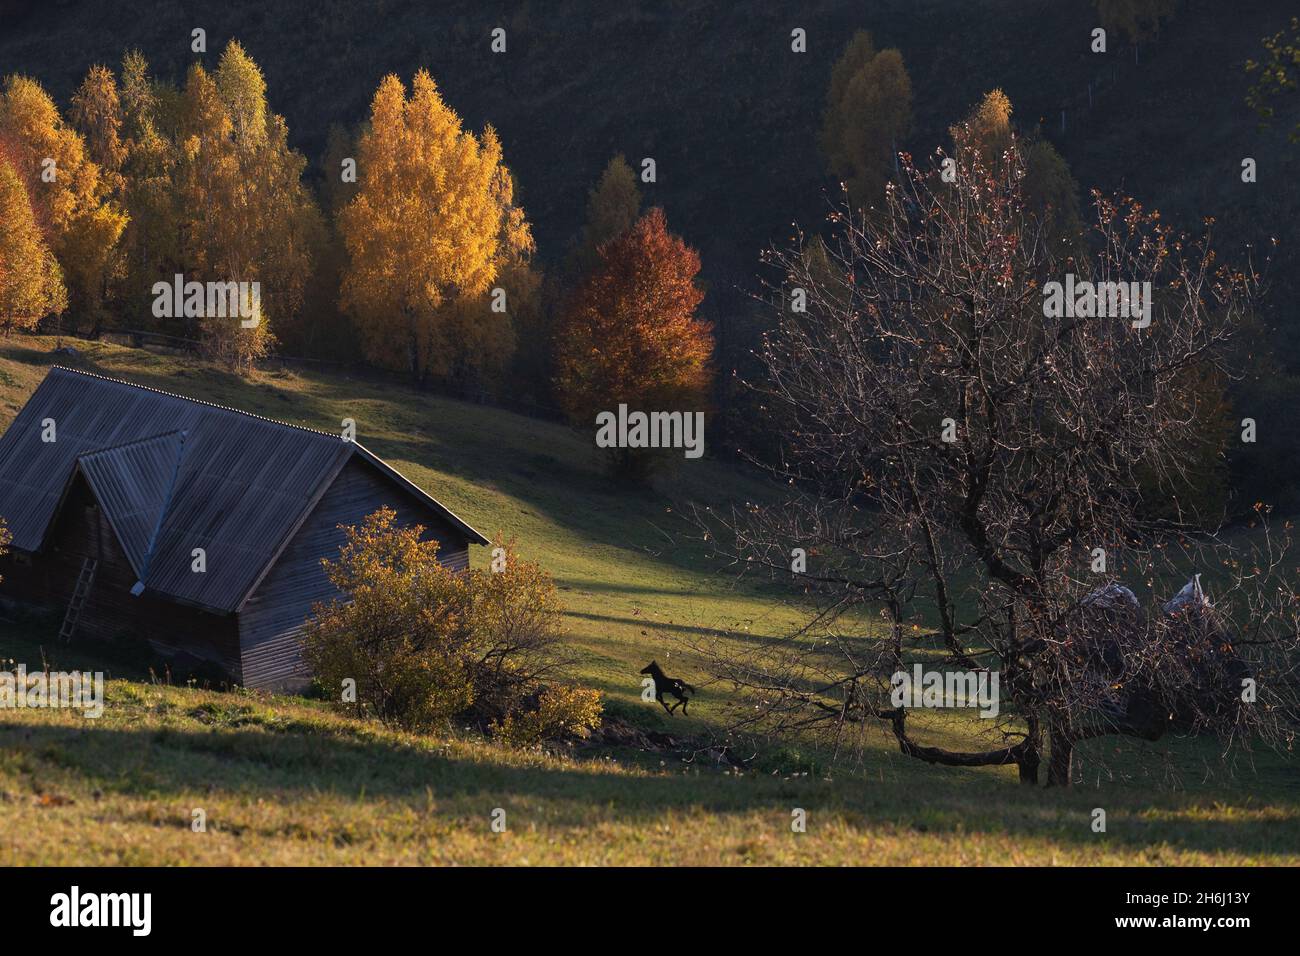 Mountain rural landscape with autumn colors In Brasov county, Romania Stock Photo